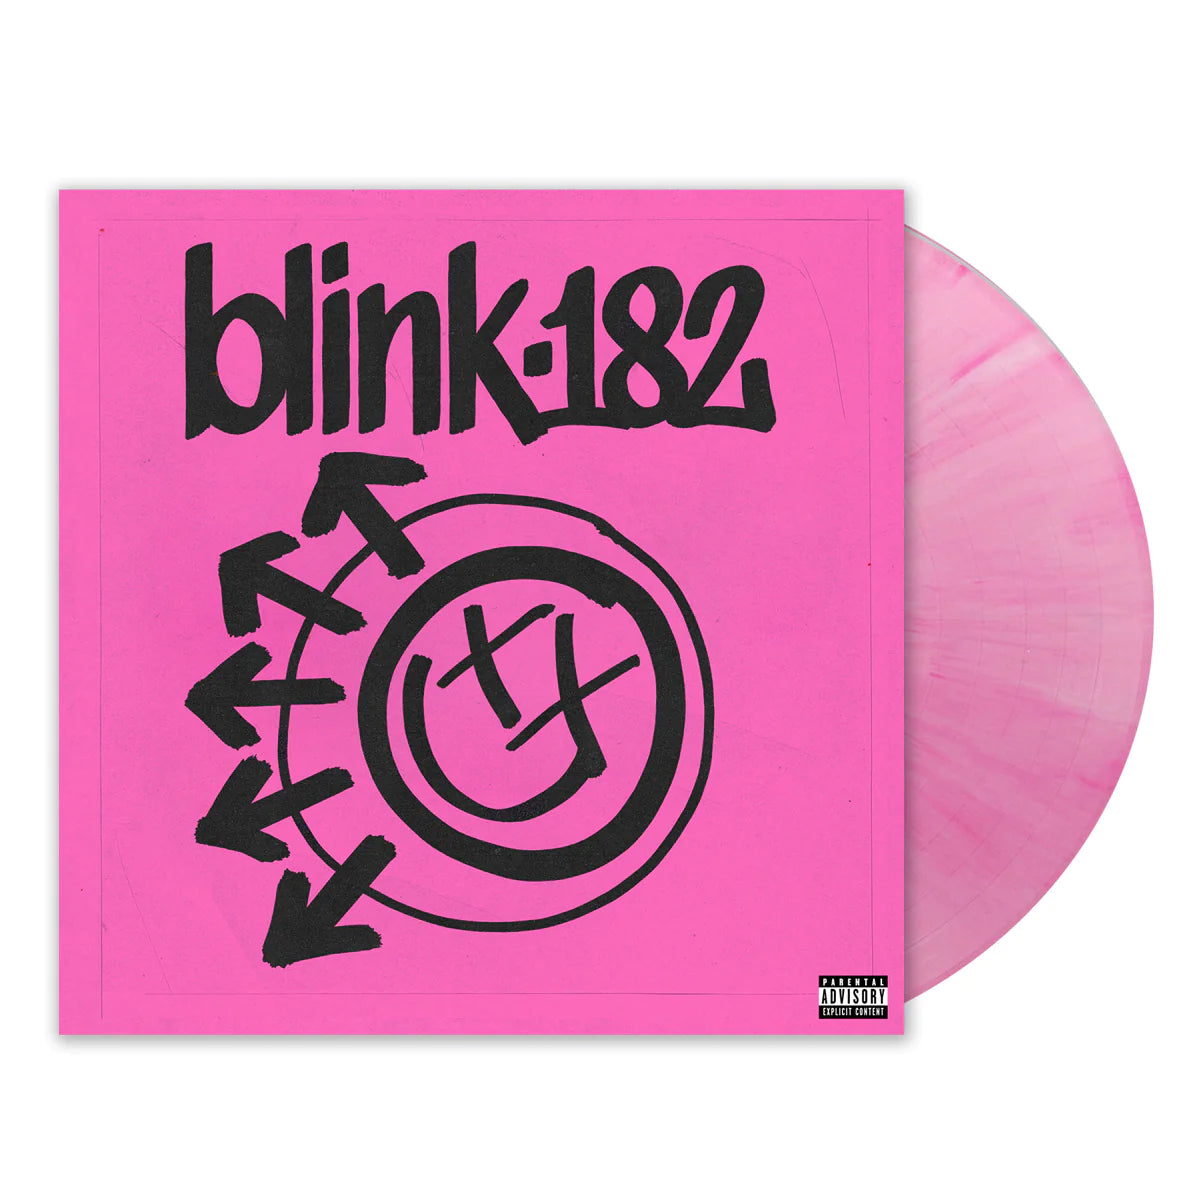 ONE MORE TIME... Mark's Pink & White Marble LP Vinyl (Limited D2C Exclusive Color)